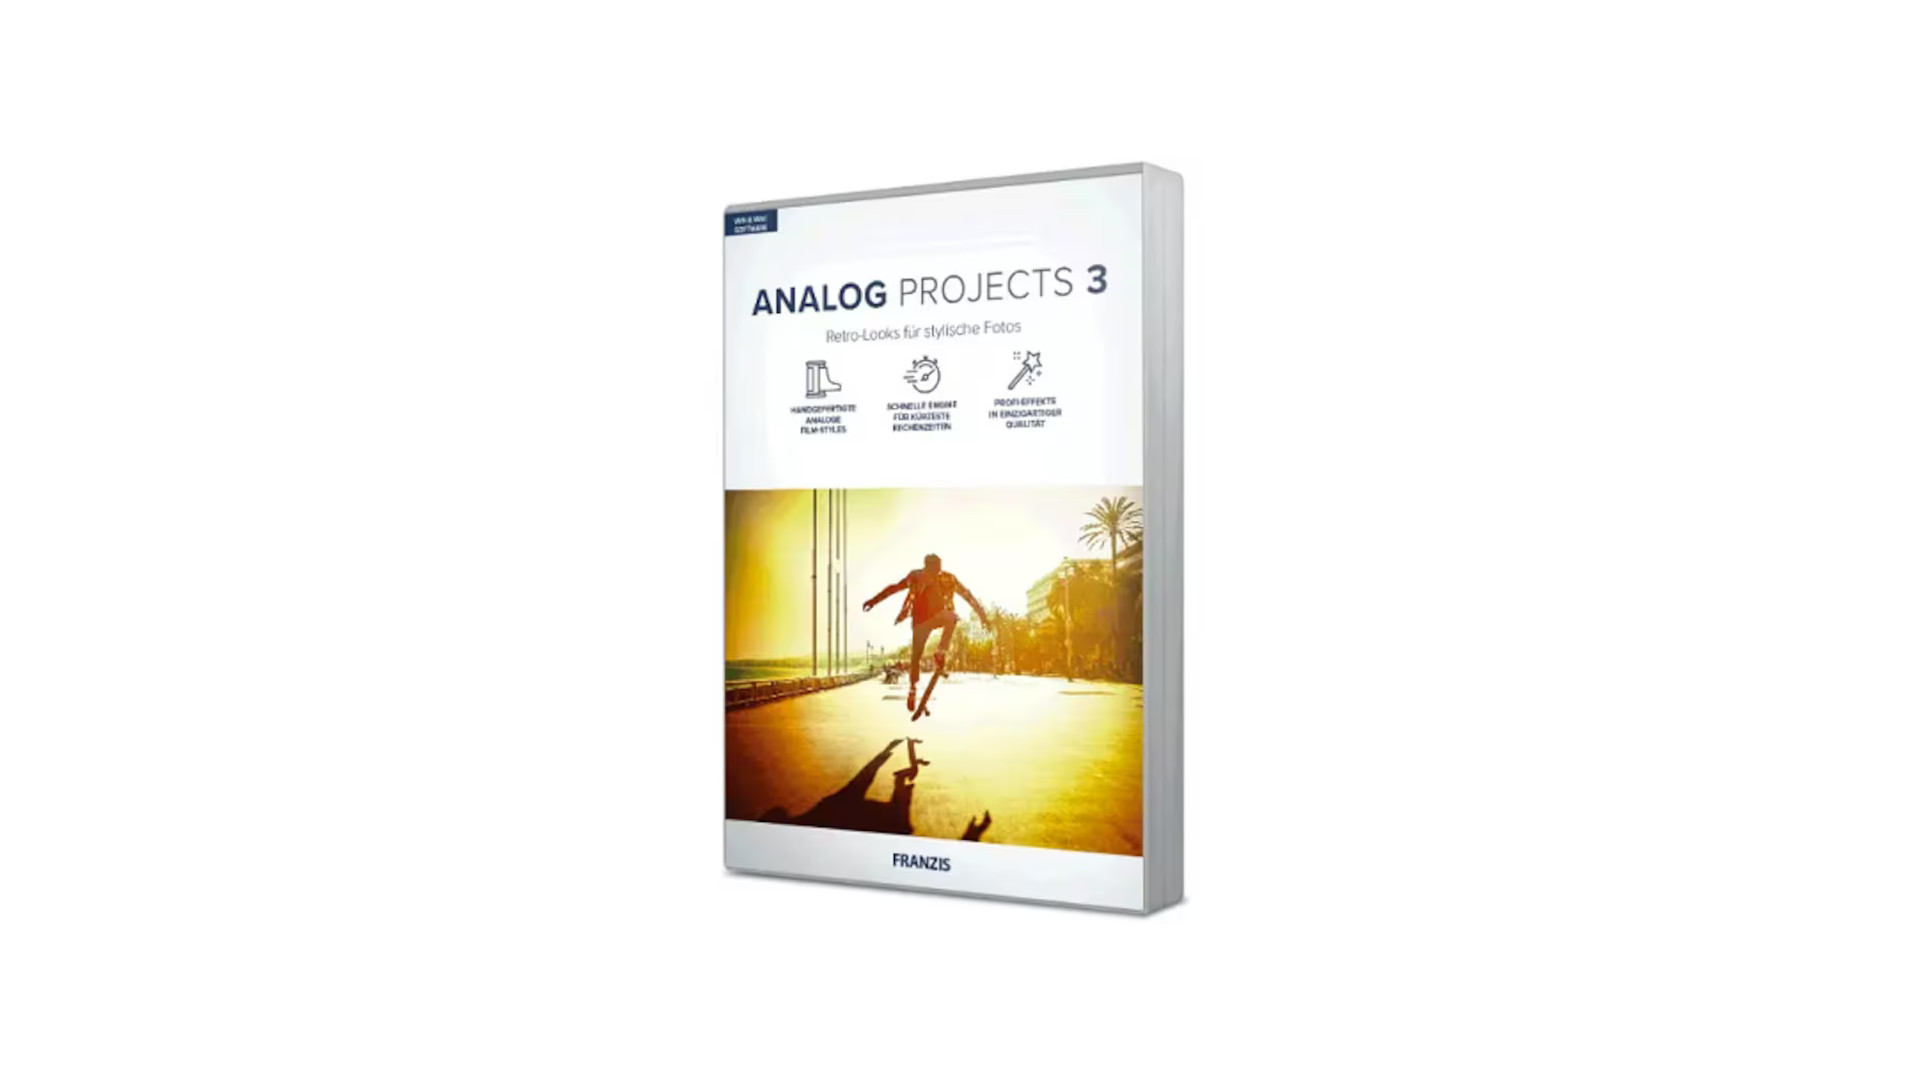 (33.89$) ANALOG projects 3 - Project Software Key (Lifetime / 1 PC)